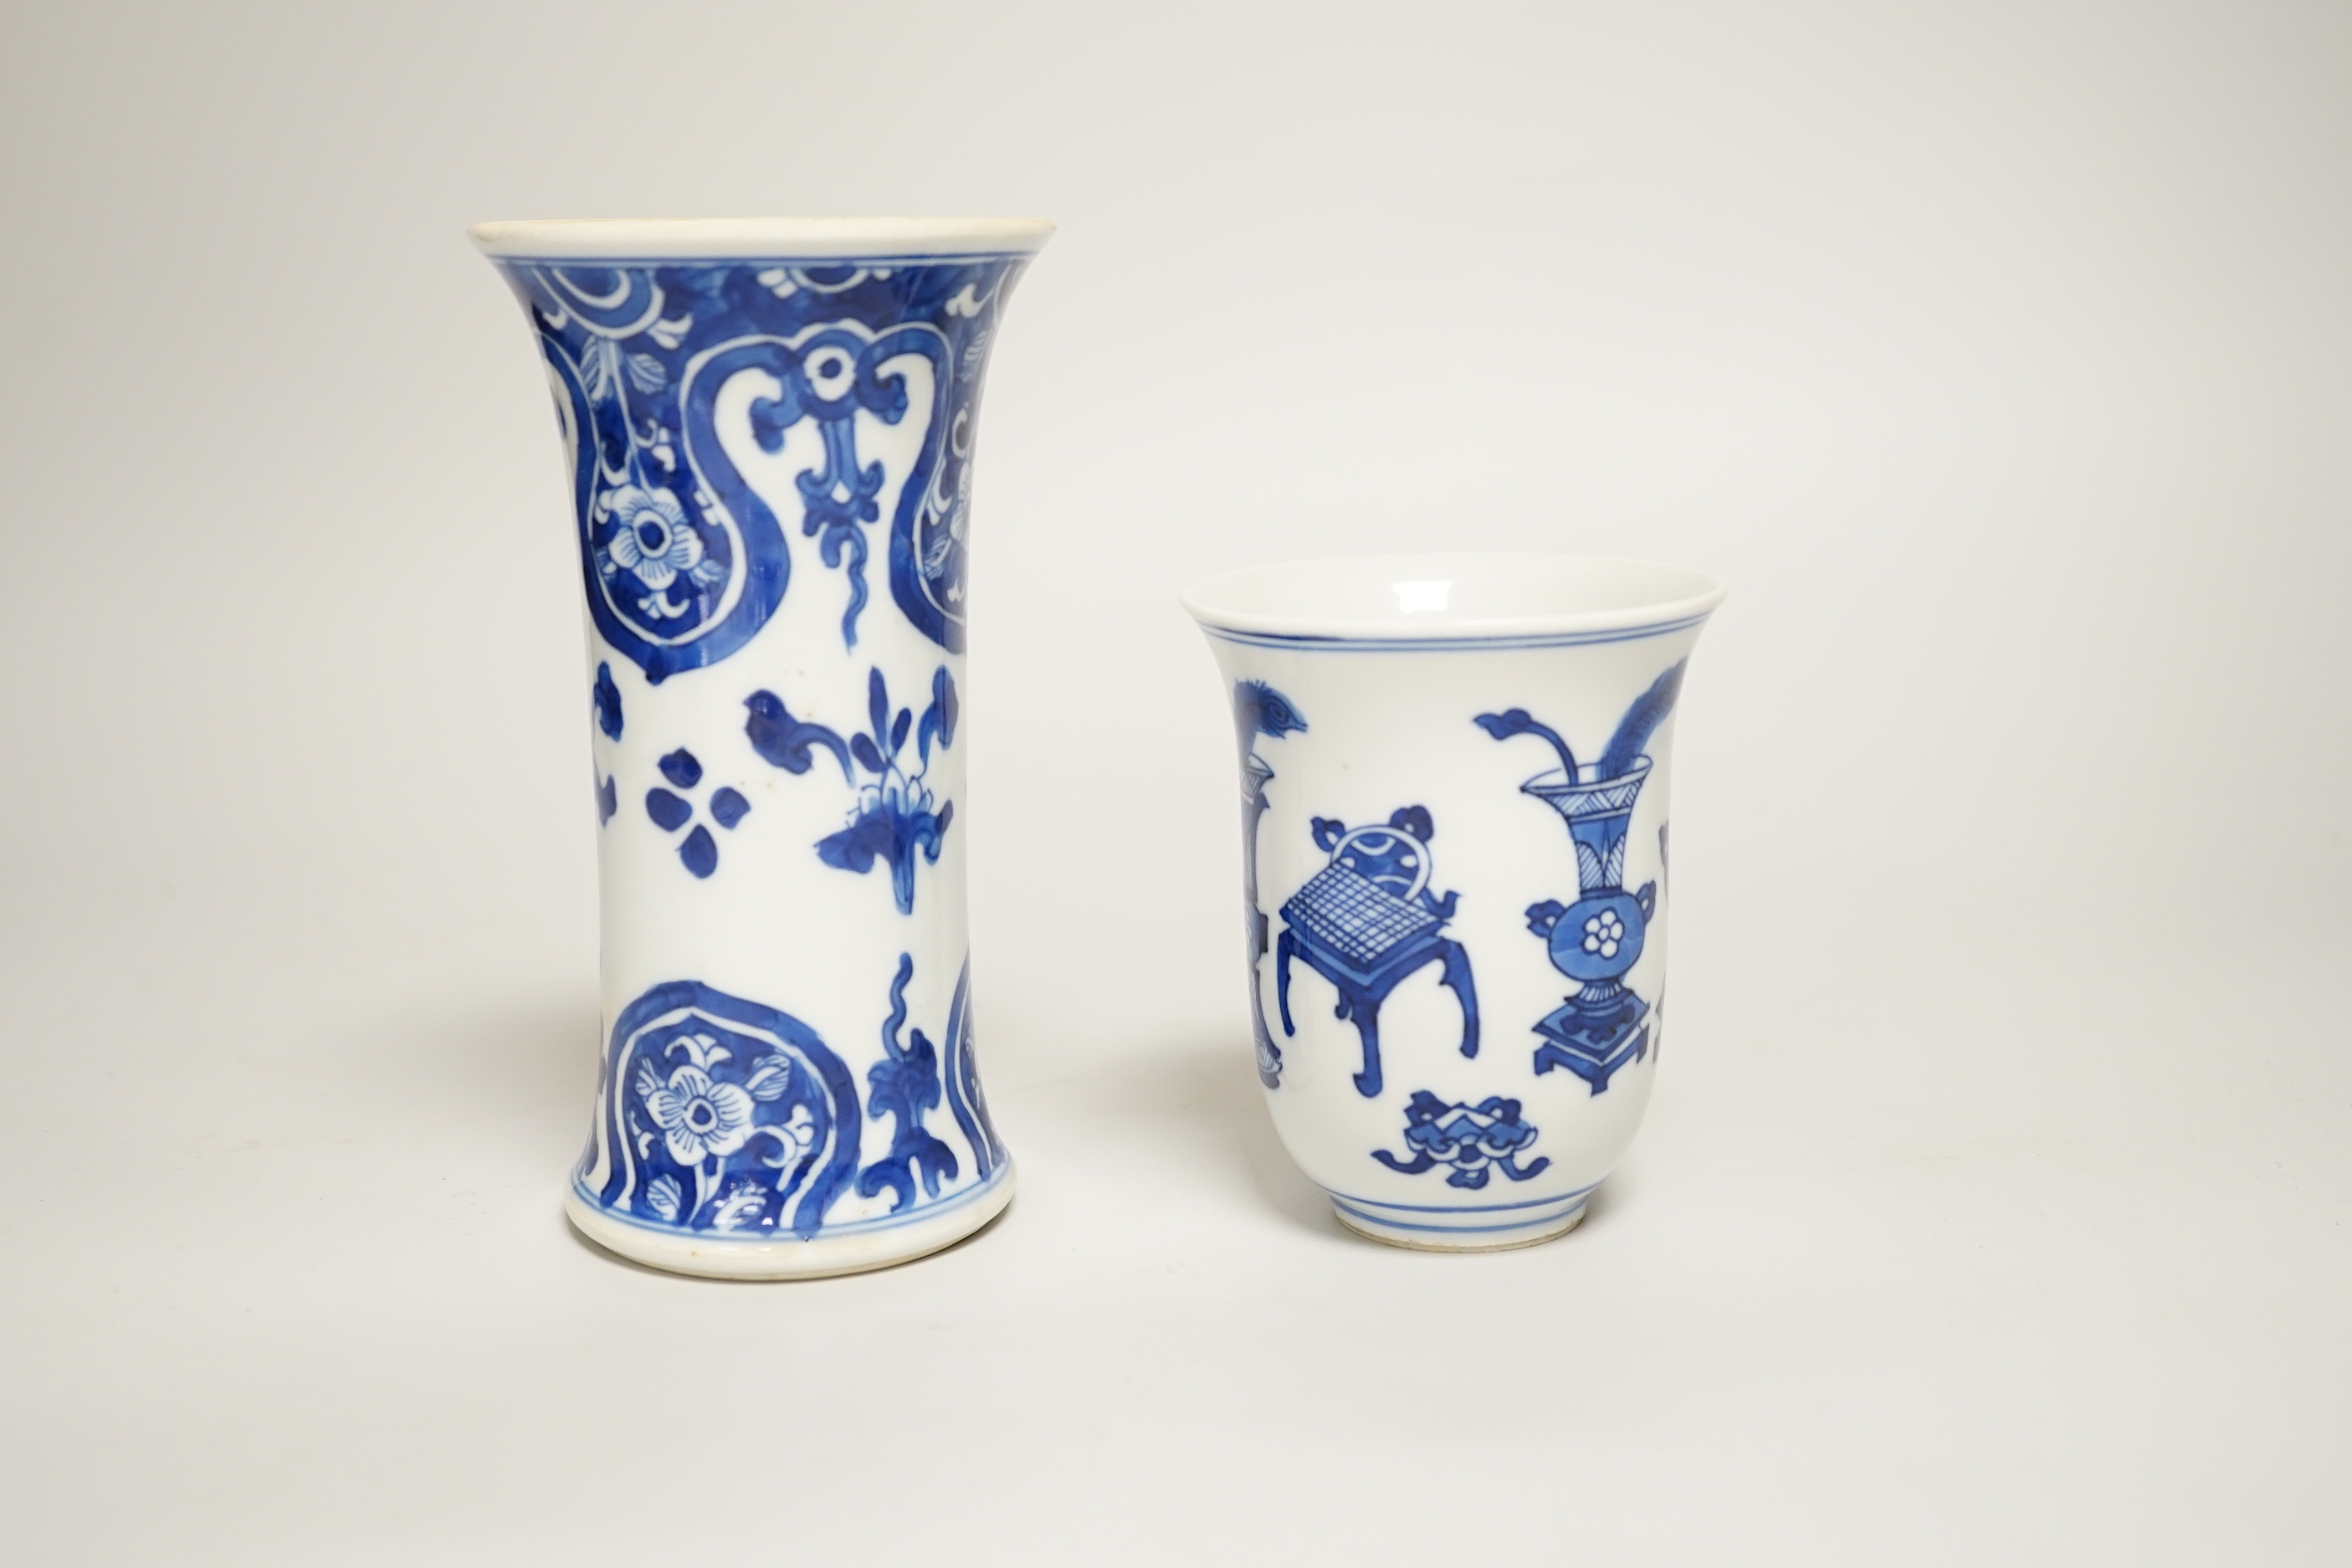 A Chinese blue and white small vase and a similar ‘Hundred Antiques’ chocolate cup, both Kangxi period, chocolate cup 9cms high